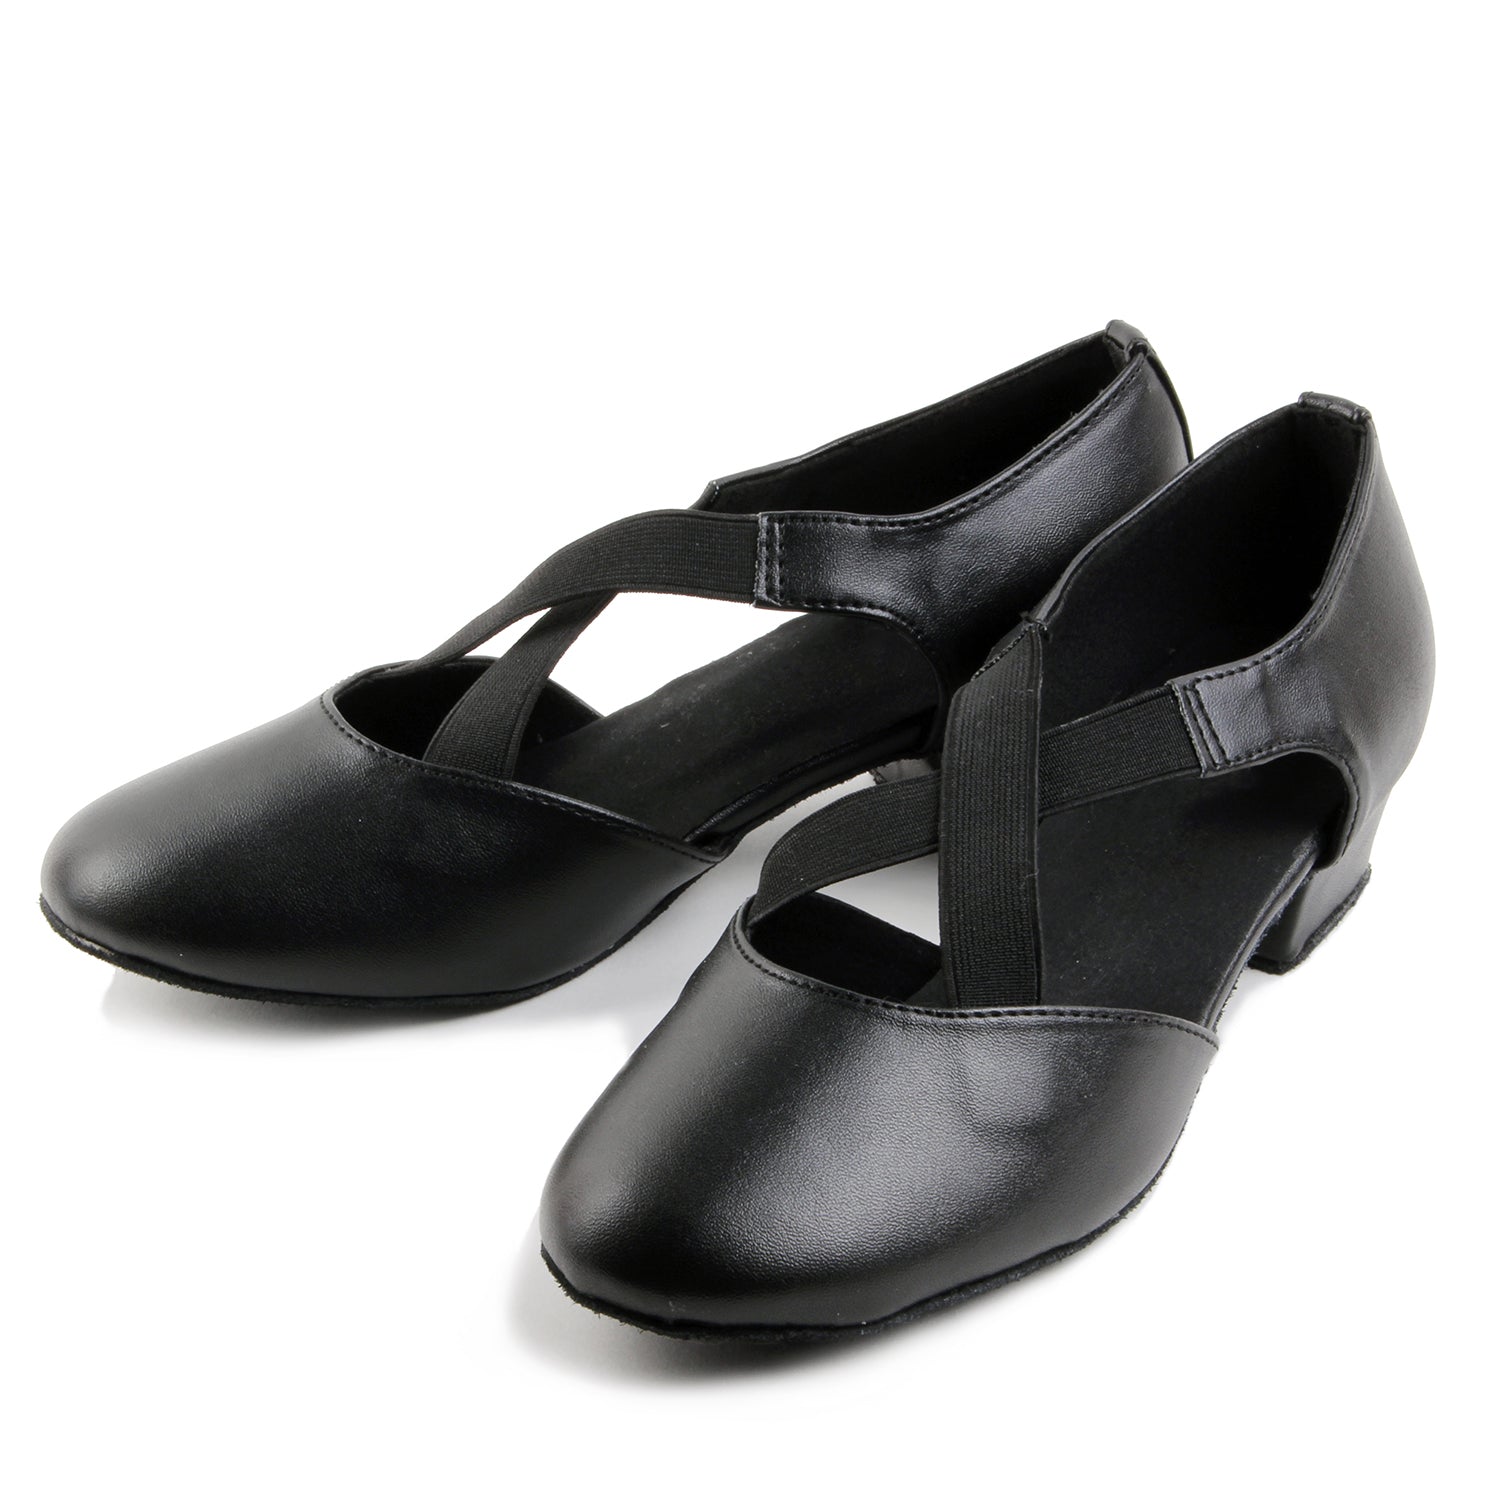 Ladies black suede sole ballroom dancing shoes for tango and latin practice with closed-toe design (PD7307A)3